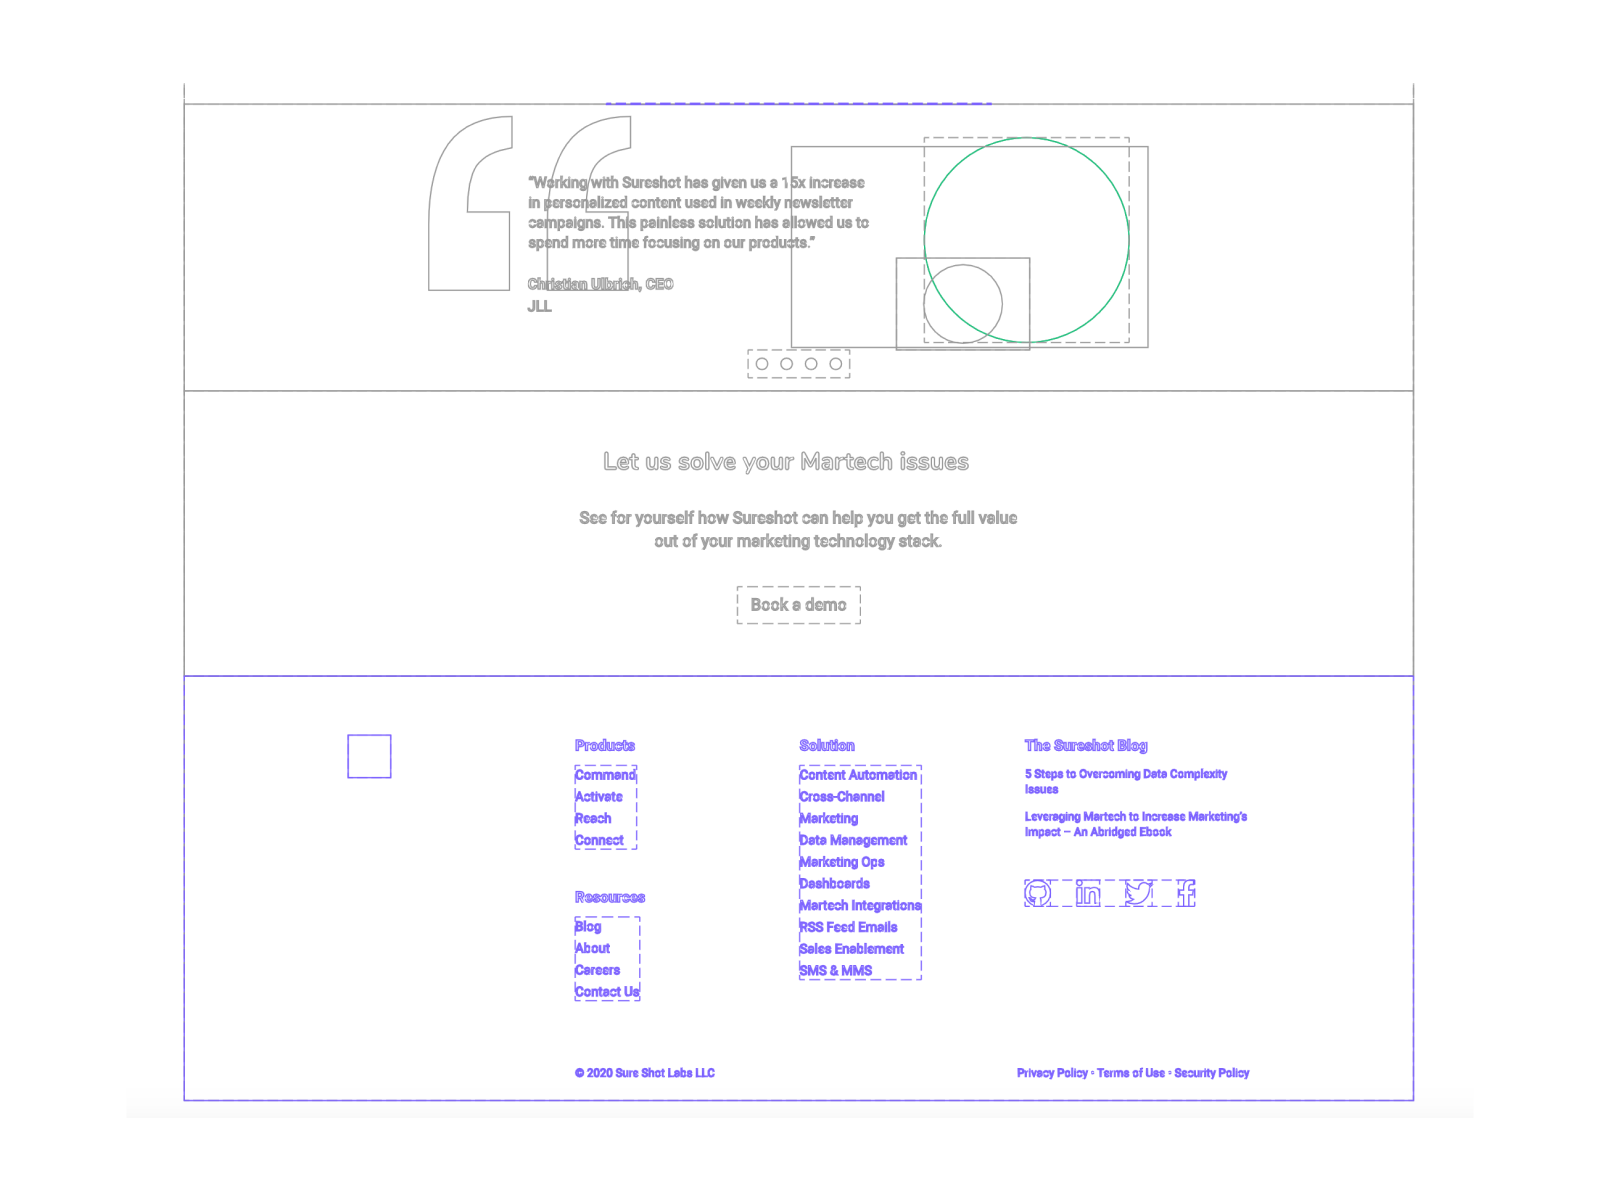 Shown is a wireframe of the homepage with a different layout